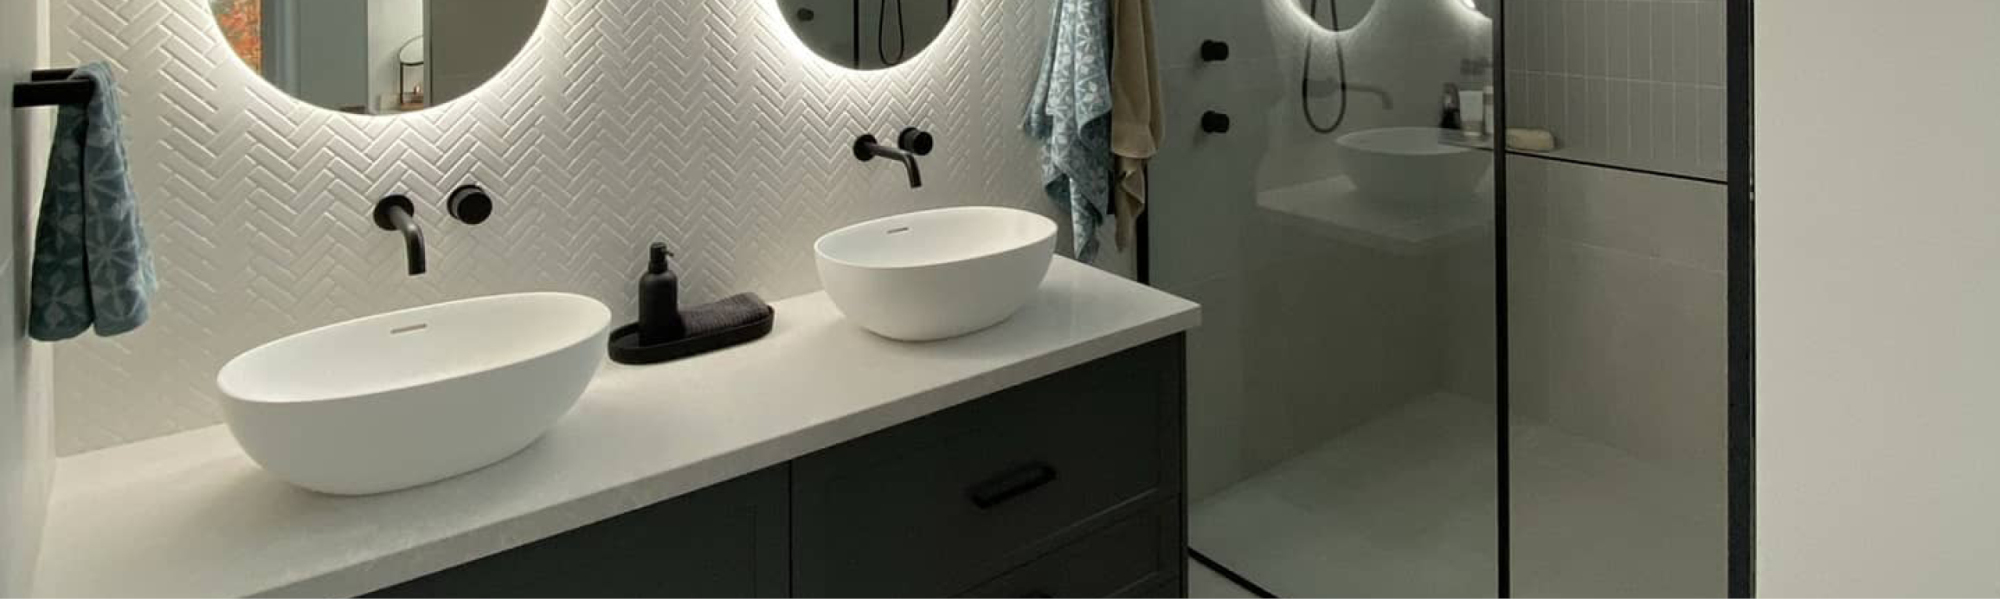 Creating beautiful bathroom vanities that function correctly comes down to the finer planning. Dodge Cabinets are experts in creating beautiful, functional bathroom storage and vanities. Like this space which features Janper DuraForm Loddon profile drawers finished in Dulux Basalt 2-Pac polyurethane adorned with Hettich hardware.